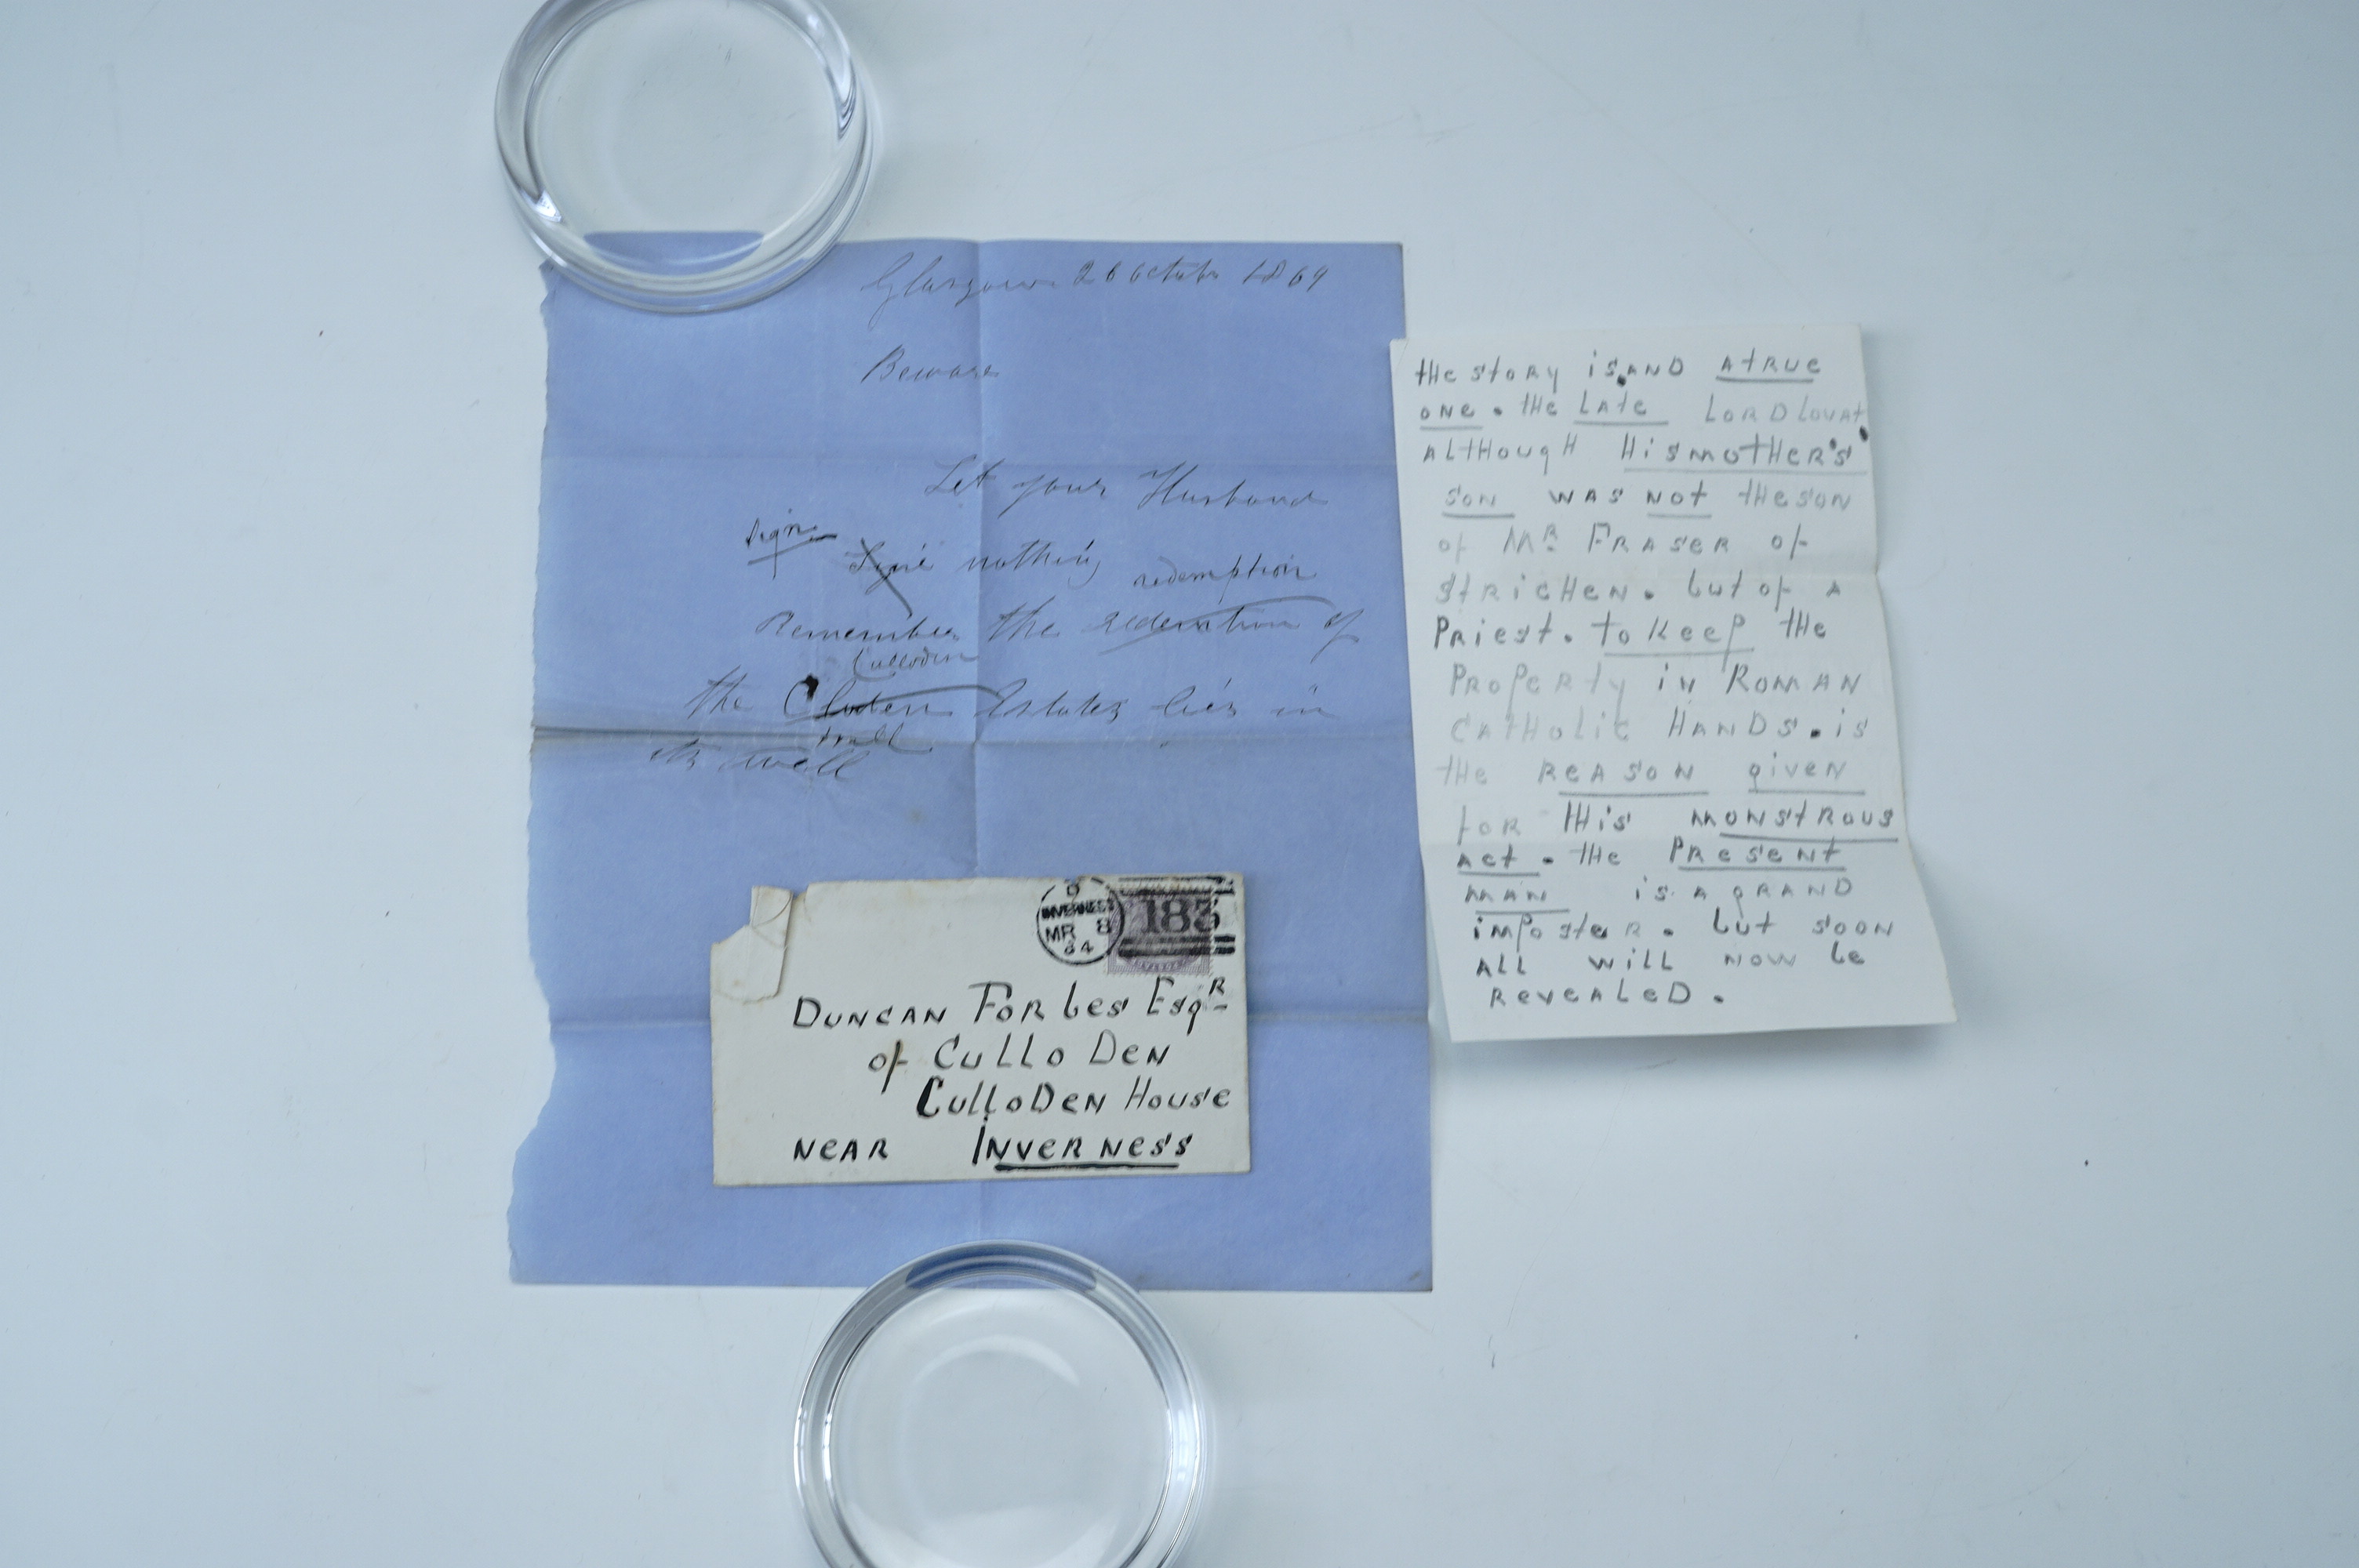 An Edwardian letter addressed to Duncan Forbes Esquire of Culloden House, near Inverness, which